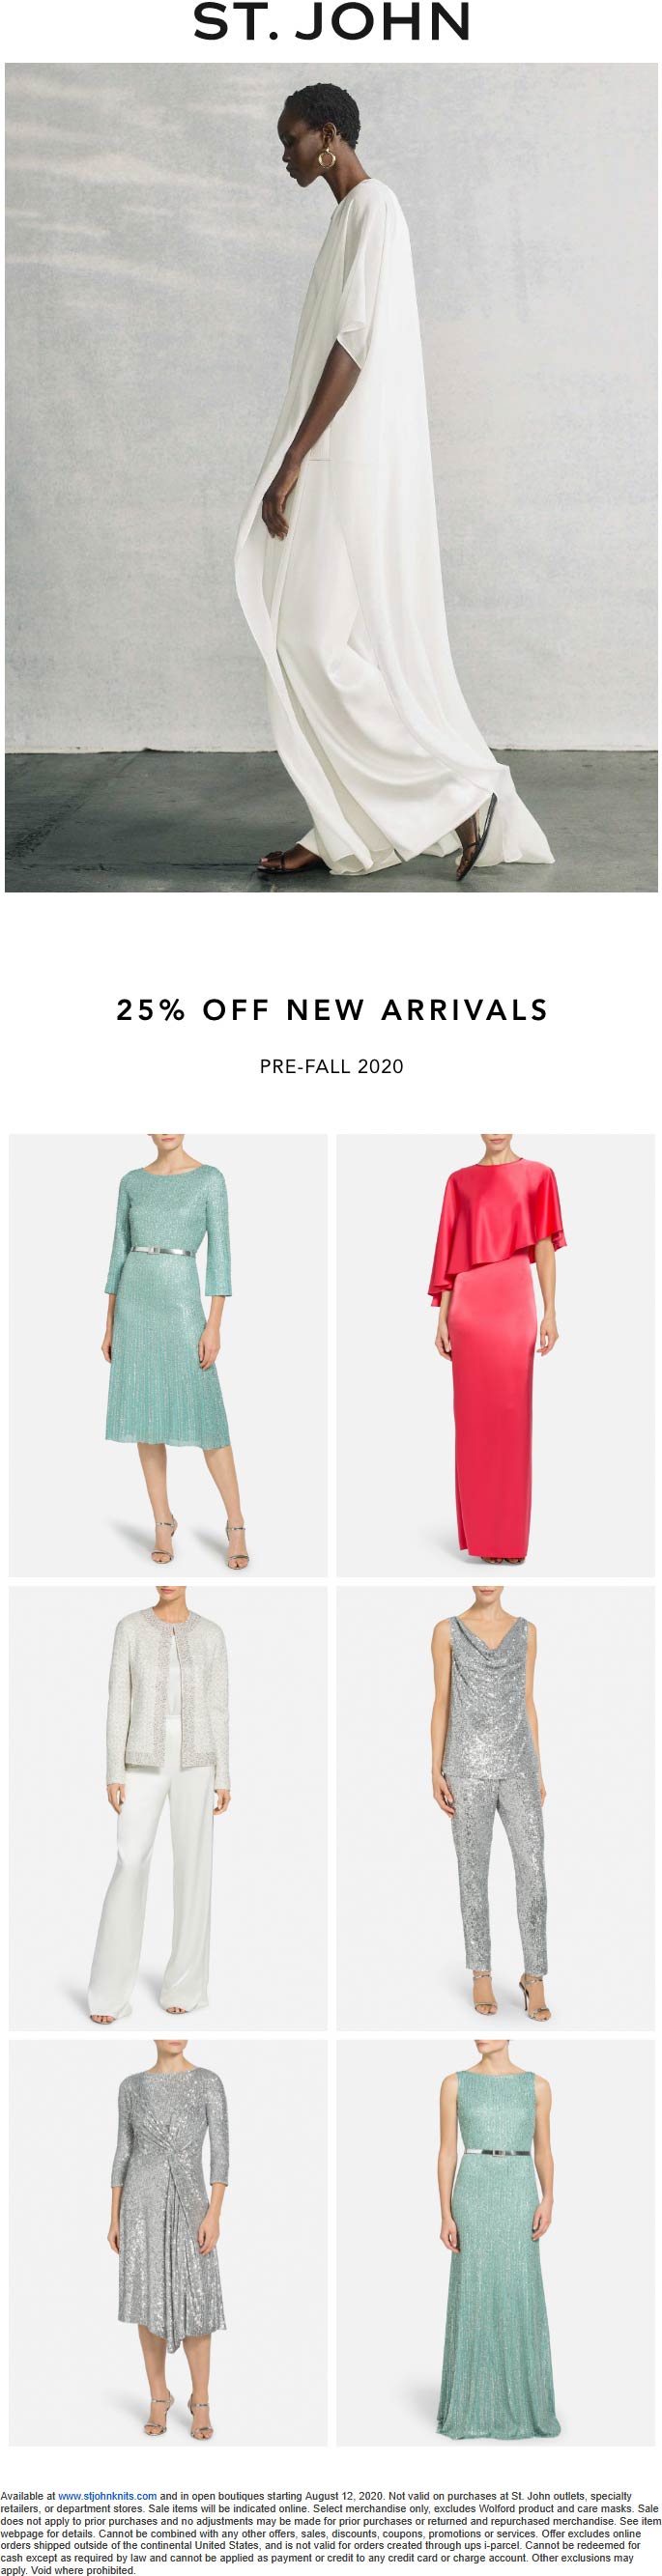 St. John stores Coupon  25% off new arrivals at St. John Knits, ditto online #stjohn 